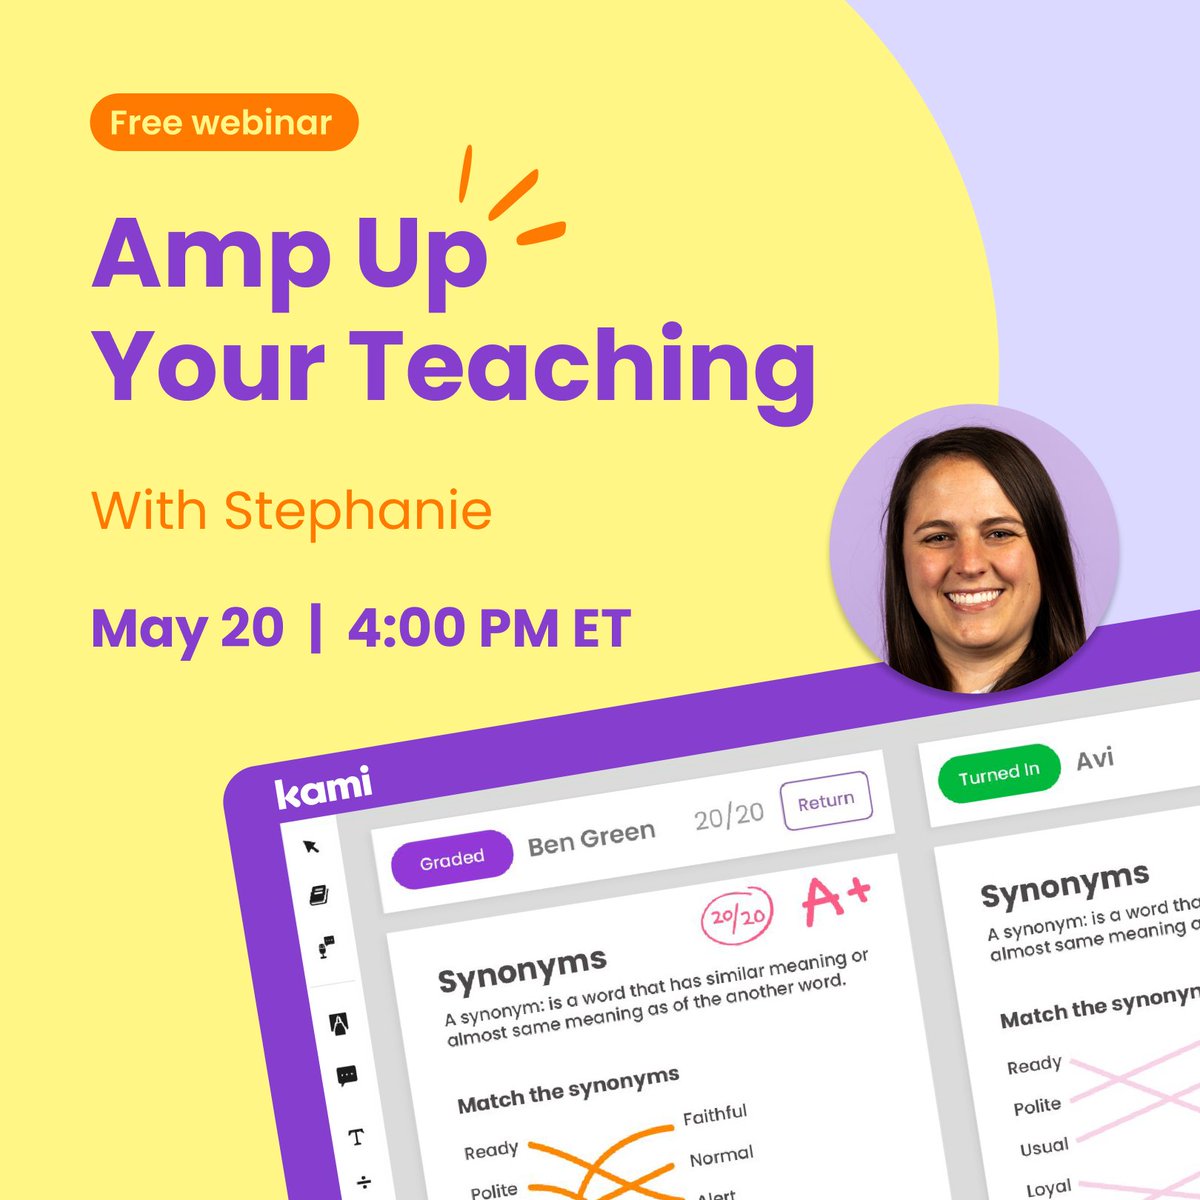 ⚡Live webinar ⚡ As the school year winds down, now is a great opportunity to prepare for next year with Kami’s time-saving tools and innovative features to maximize workflow efficiency! May 20 | 4:00 PM ET | Register 👉 meetkami.com/ampup